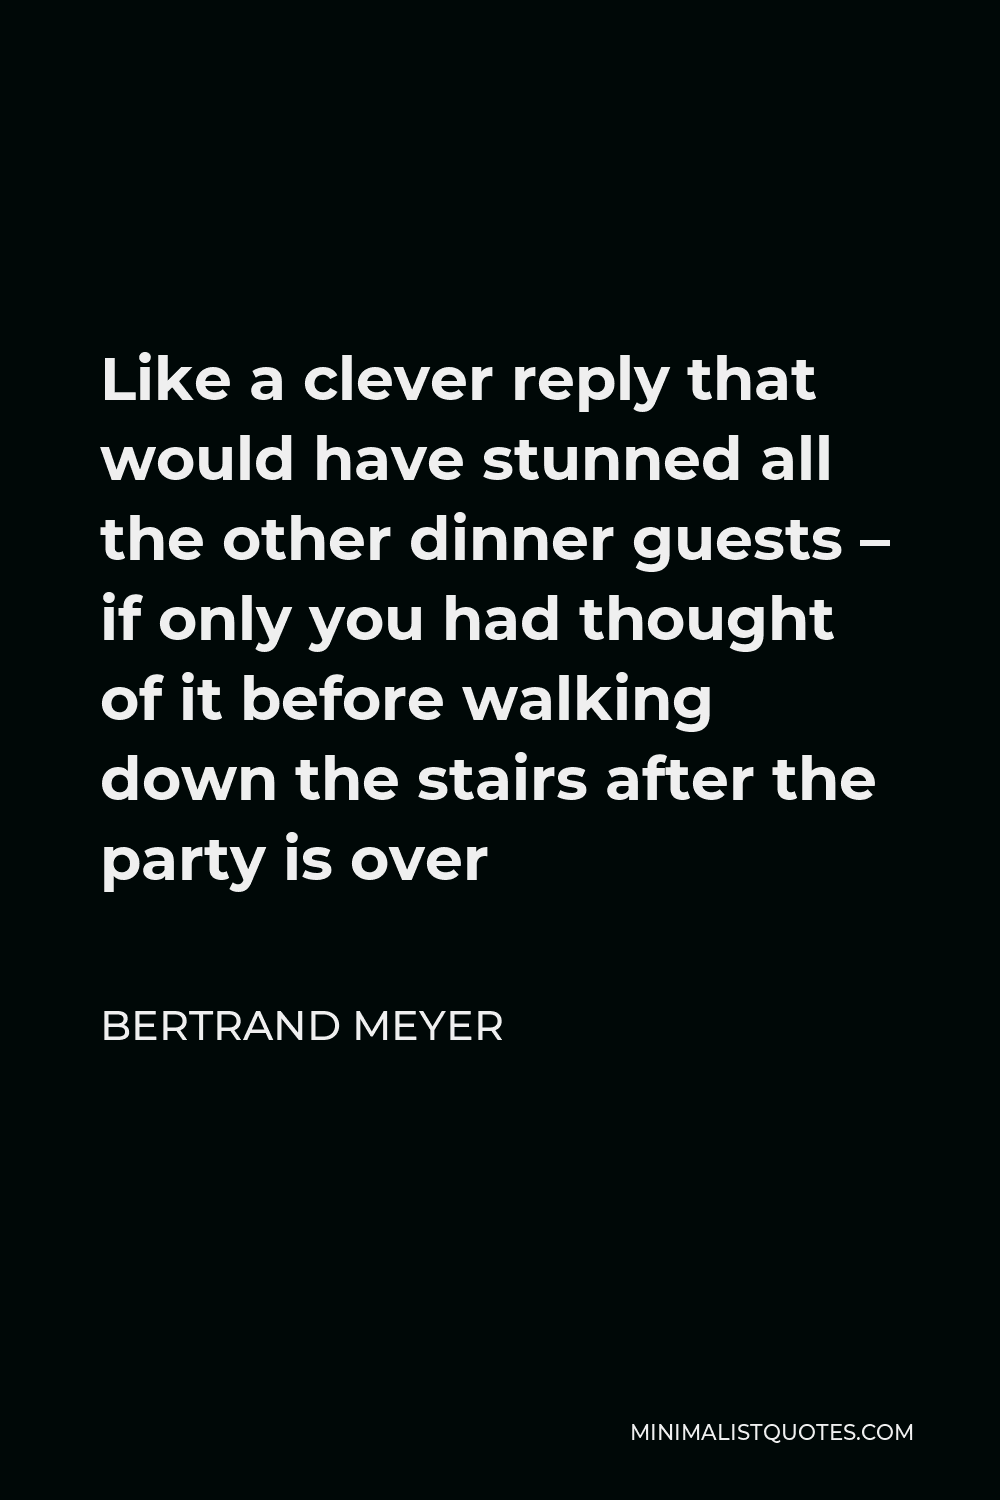 Bertrand Meyer Quote - Like a clever reply that would have stunned all the other dinner guests – if only you had thought of it before walking down the stairs after the party is over